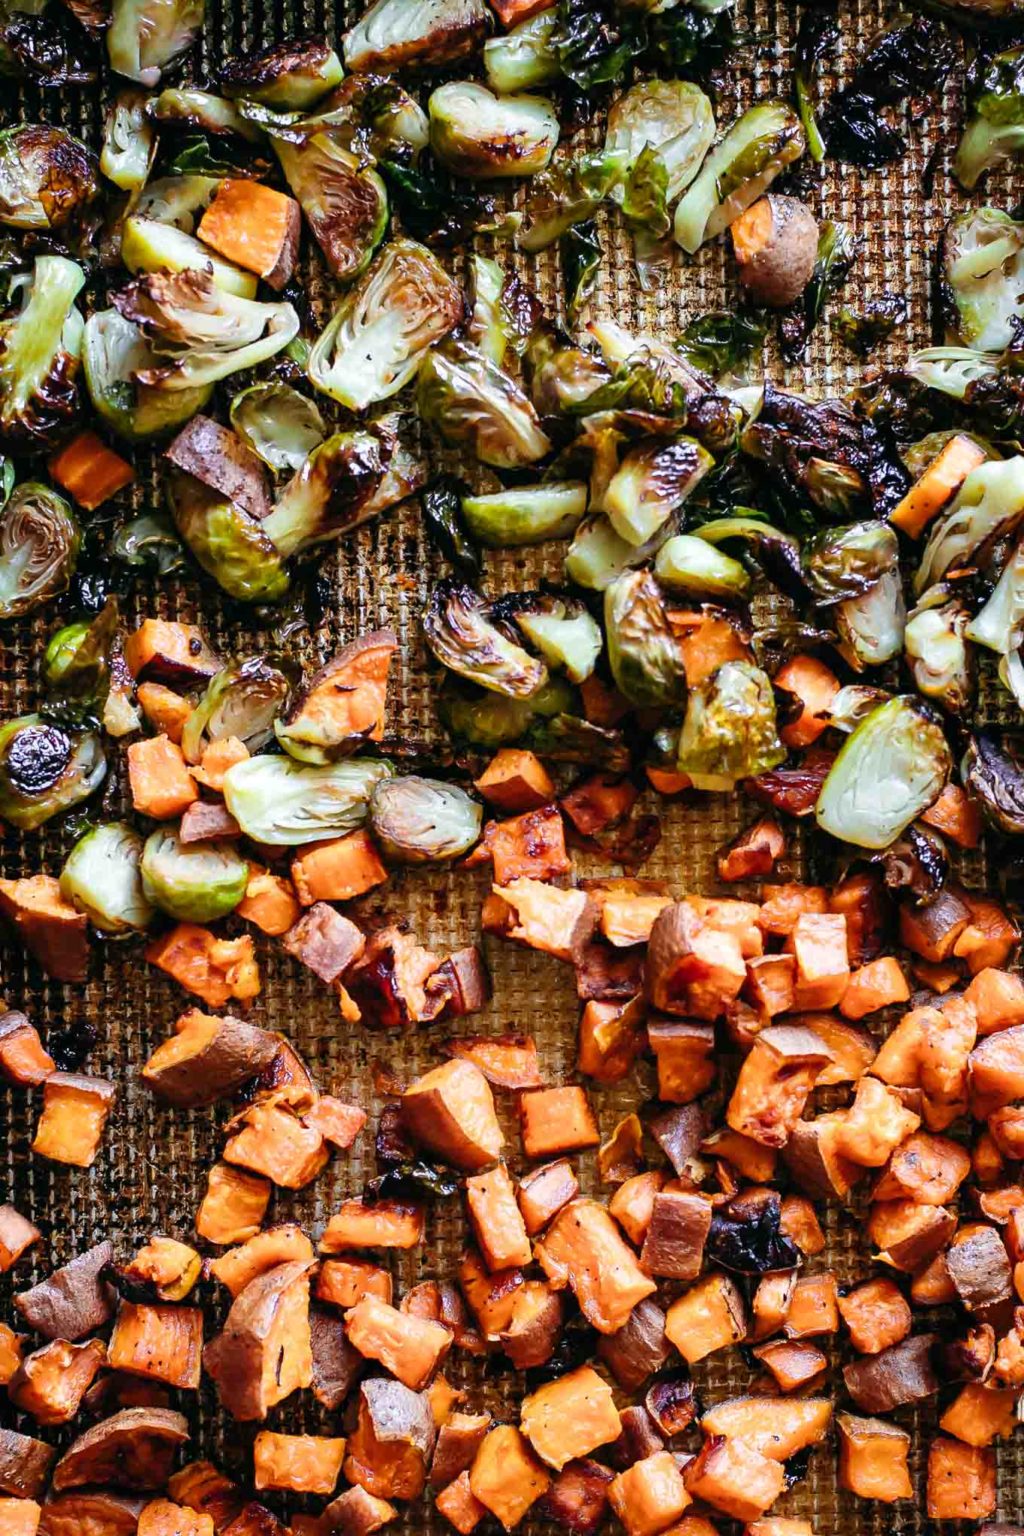 Roasted Brussels Sprouts and Sweet Potatoes | Easy, Tasty, 5 Ingredients!